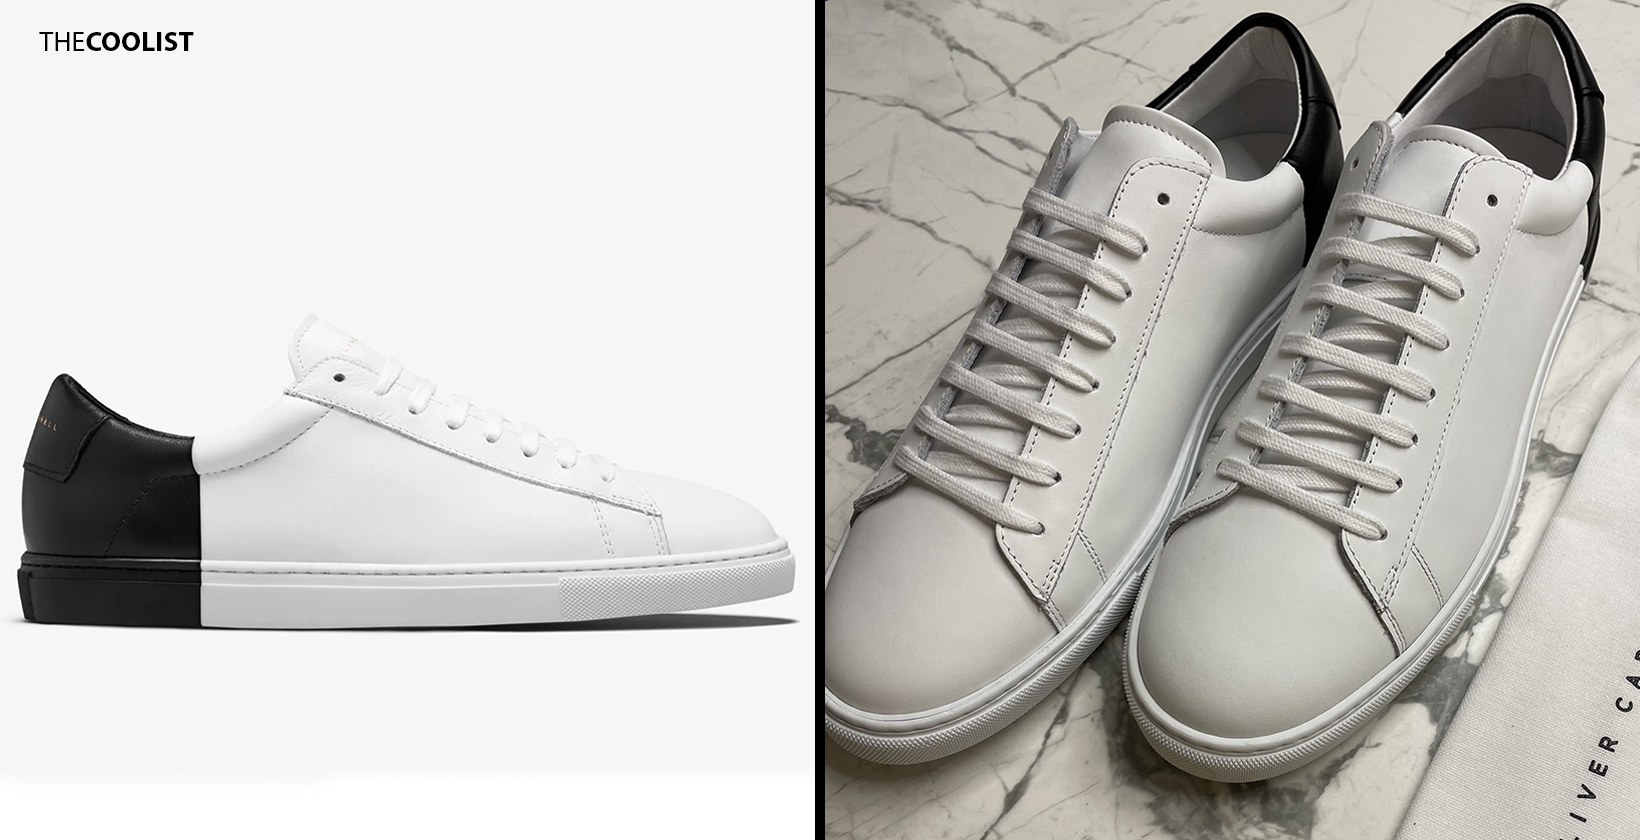 Minimalist footwear by Oliver Cabell